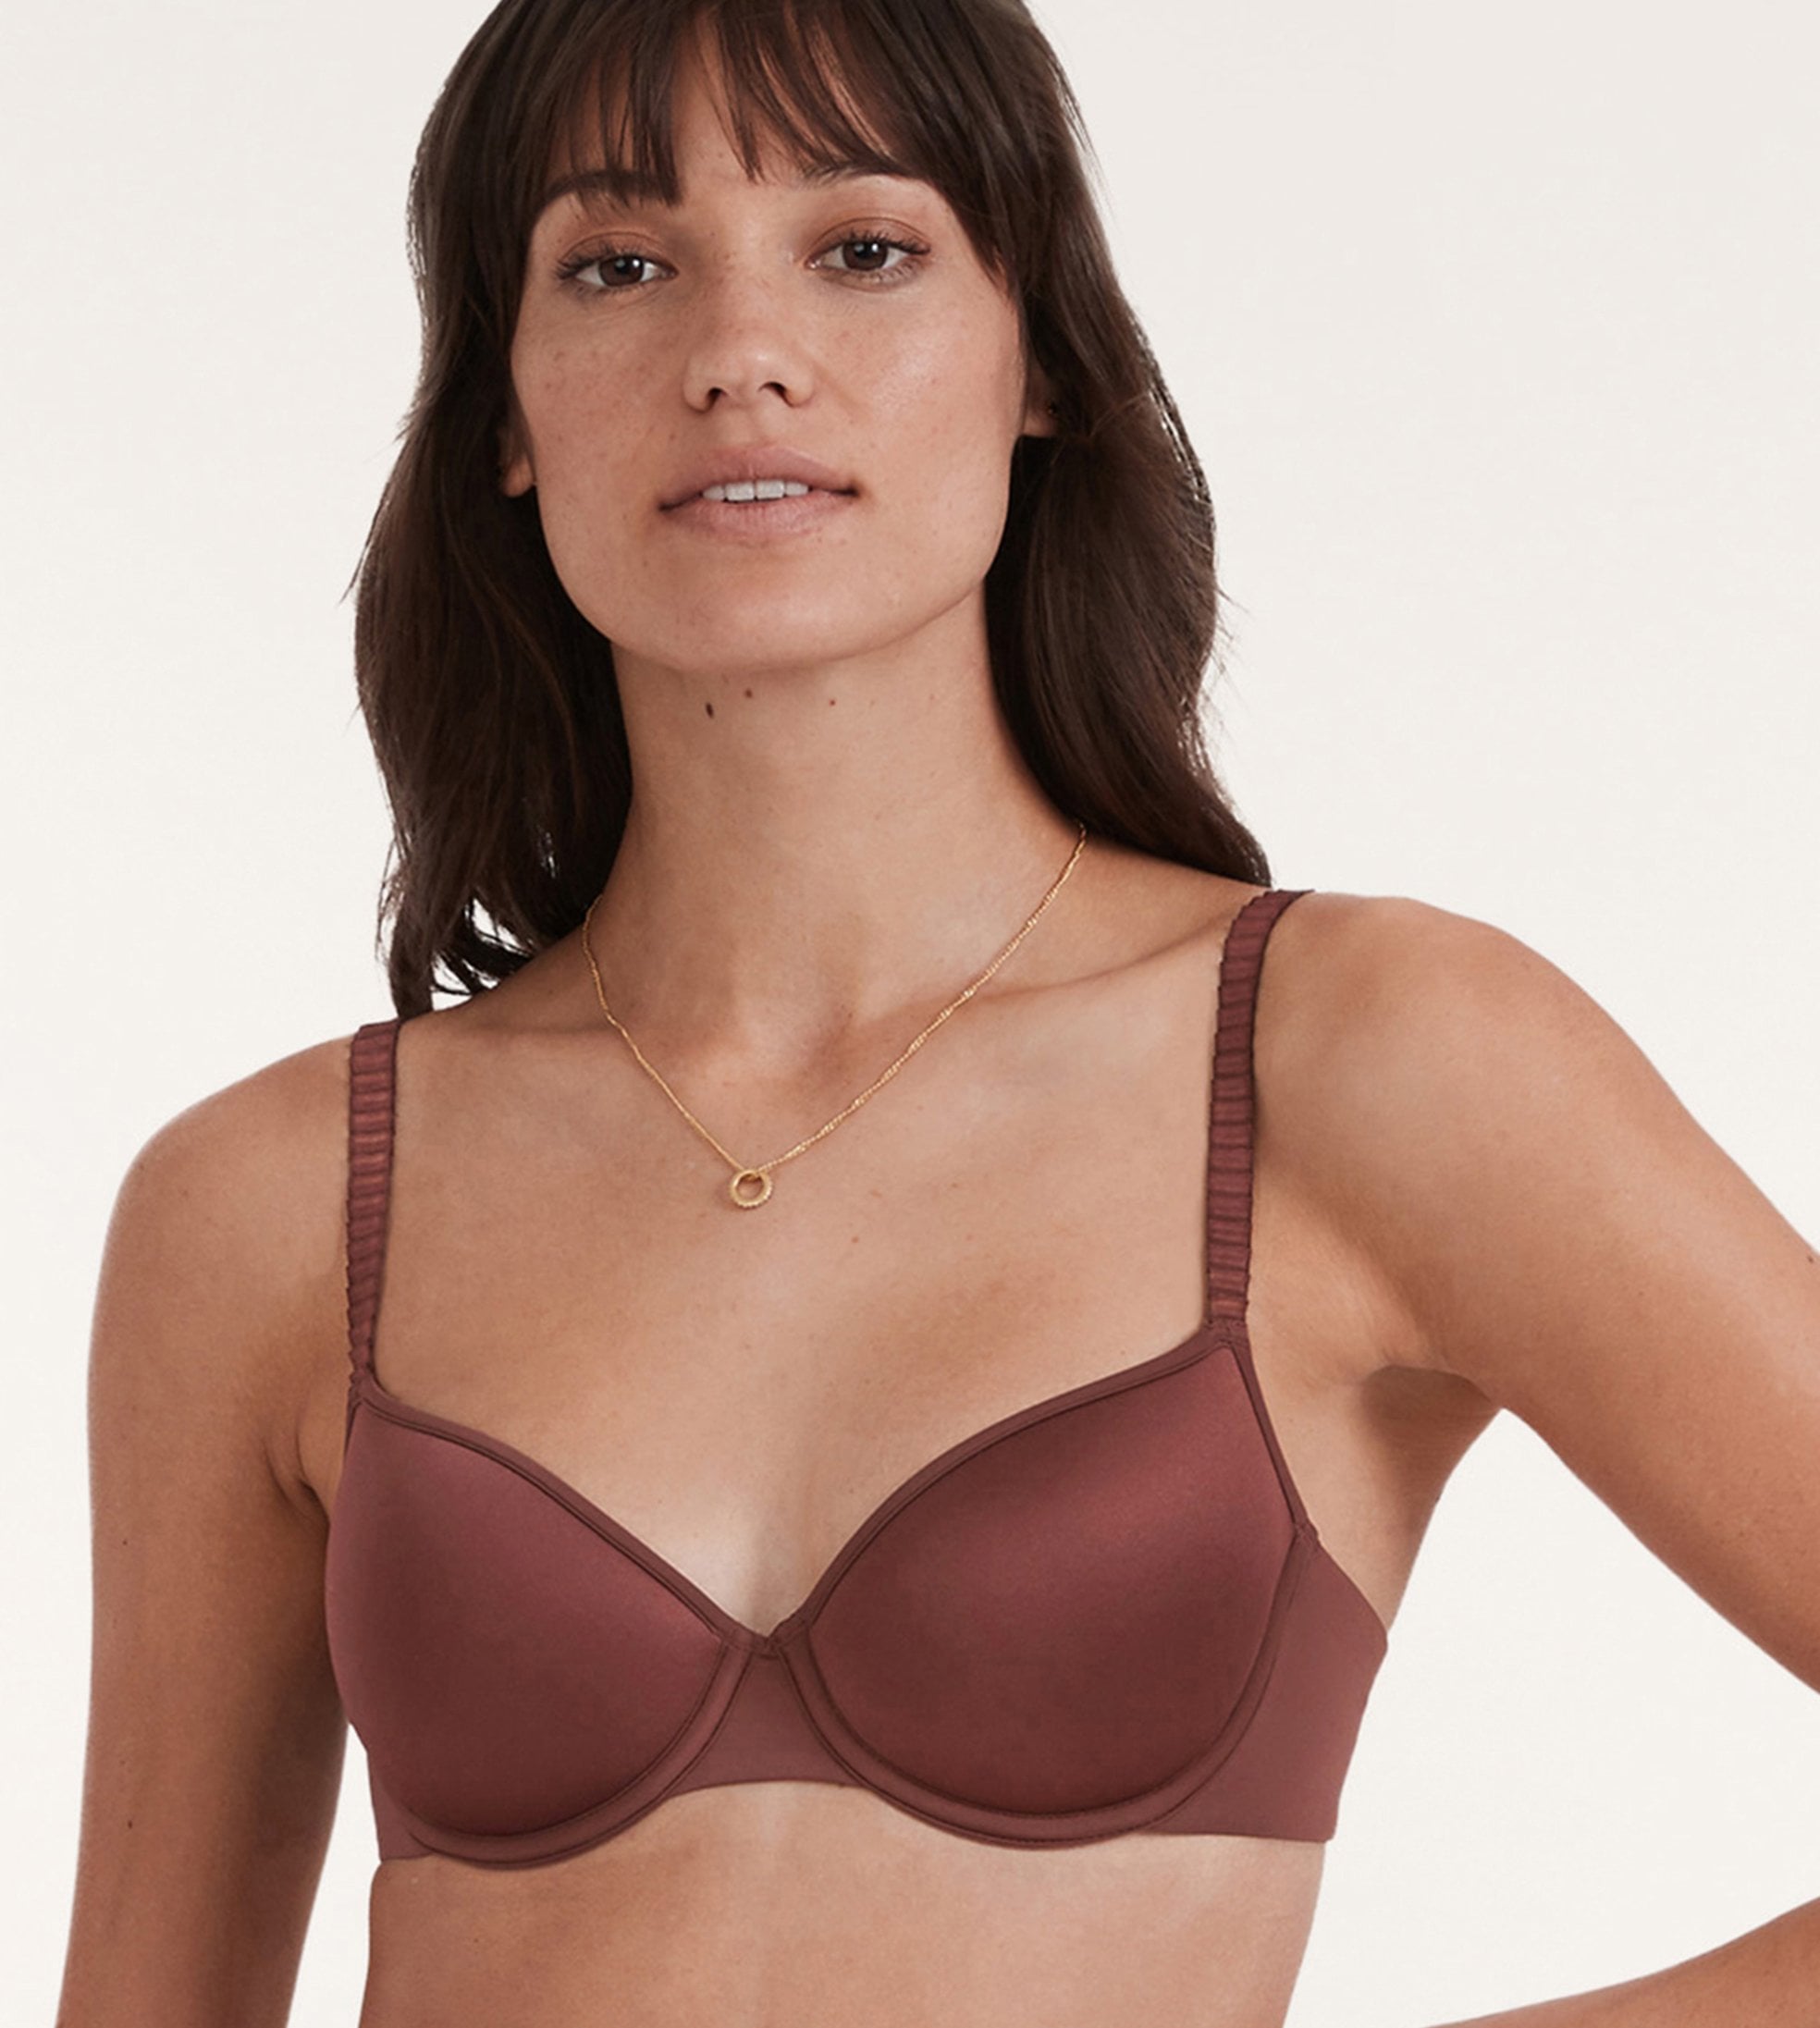 Bras For Small Busts – Little Women